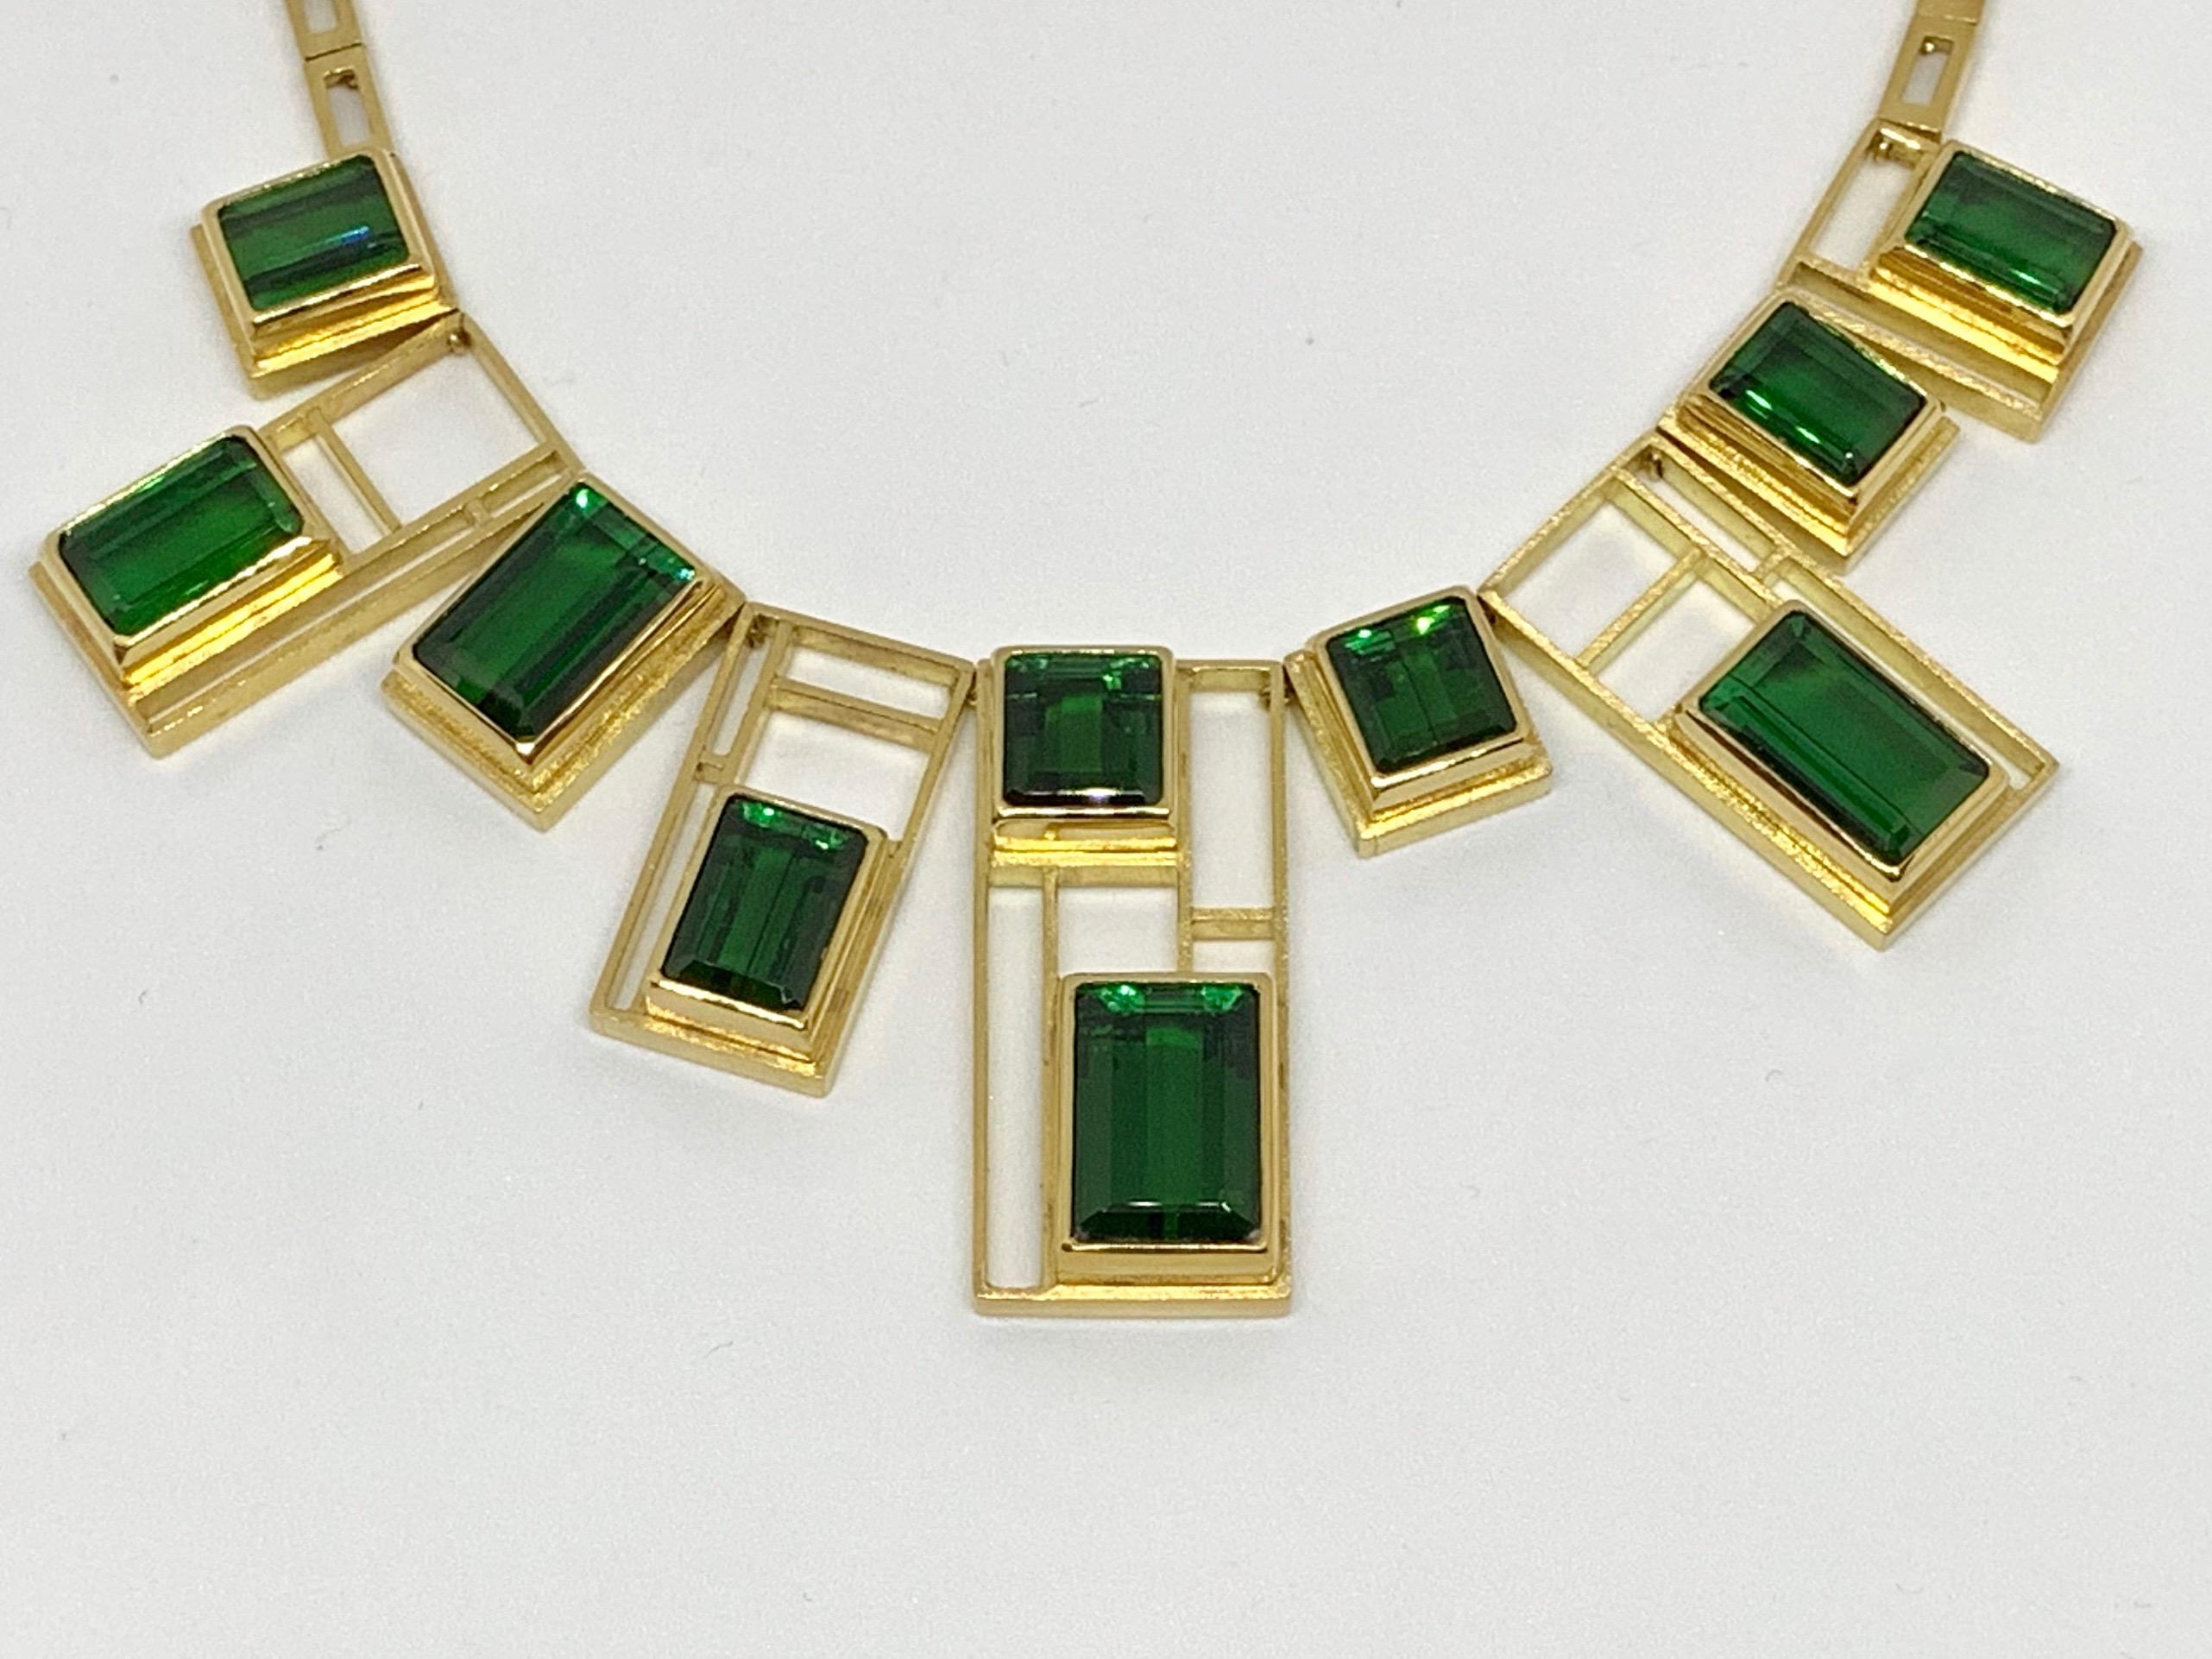 Thanks for taking a look at this exceptionally rare Burle Marx Green Tourmaline Necklace. This stunning necklace has 11 perfectly matched Tourmalines totaling 117 carats, and has 119.25 grams of gold. The tourmalines in this piece came out of the